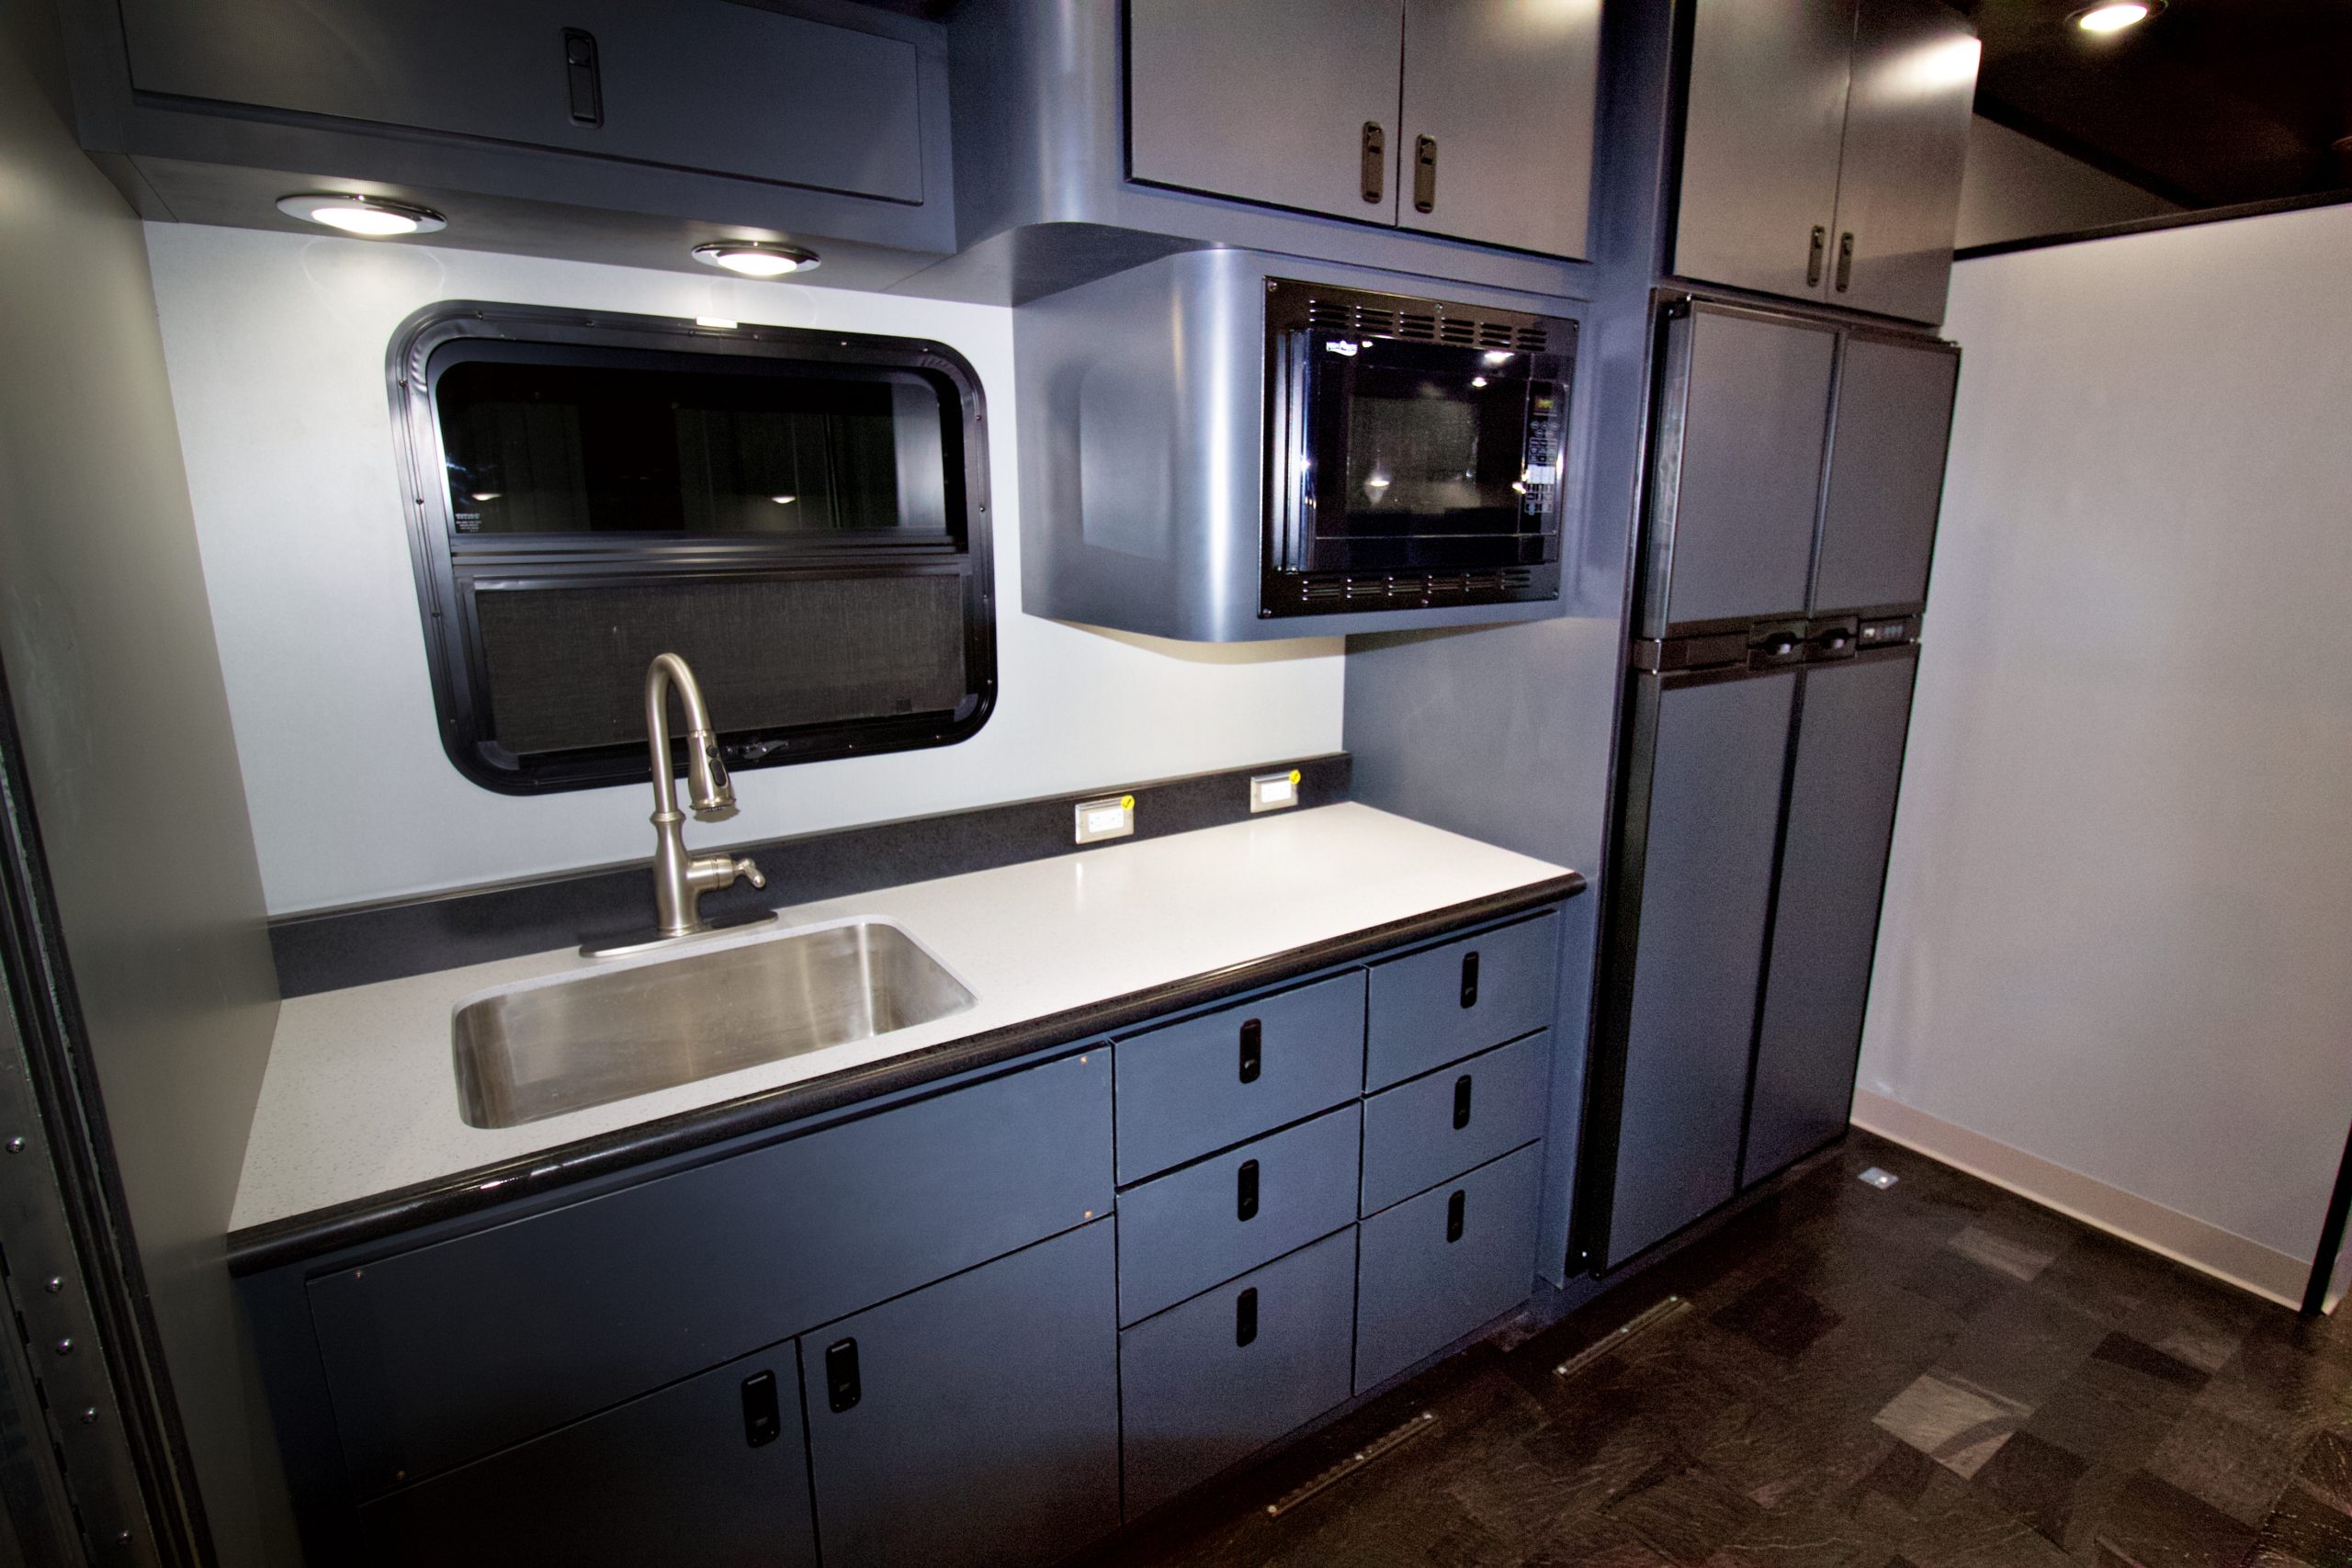 Kitchen area in GM mobile office trailer